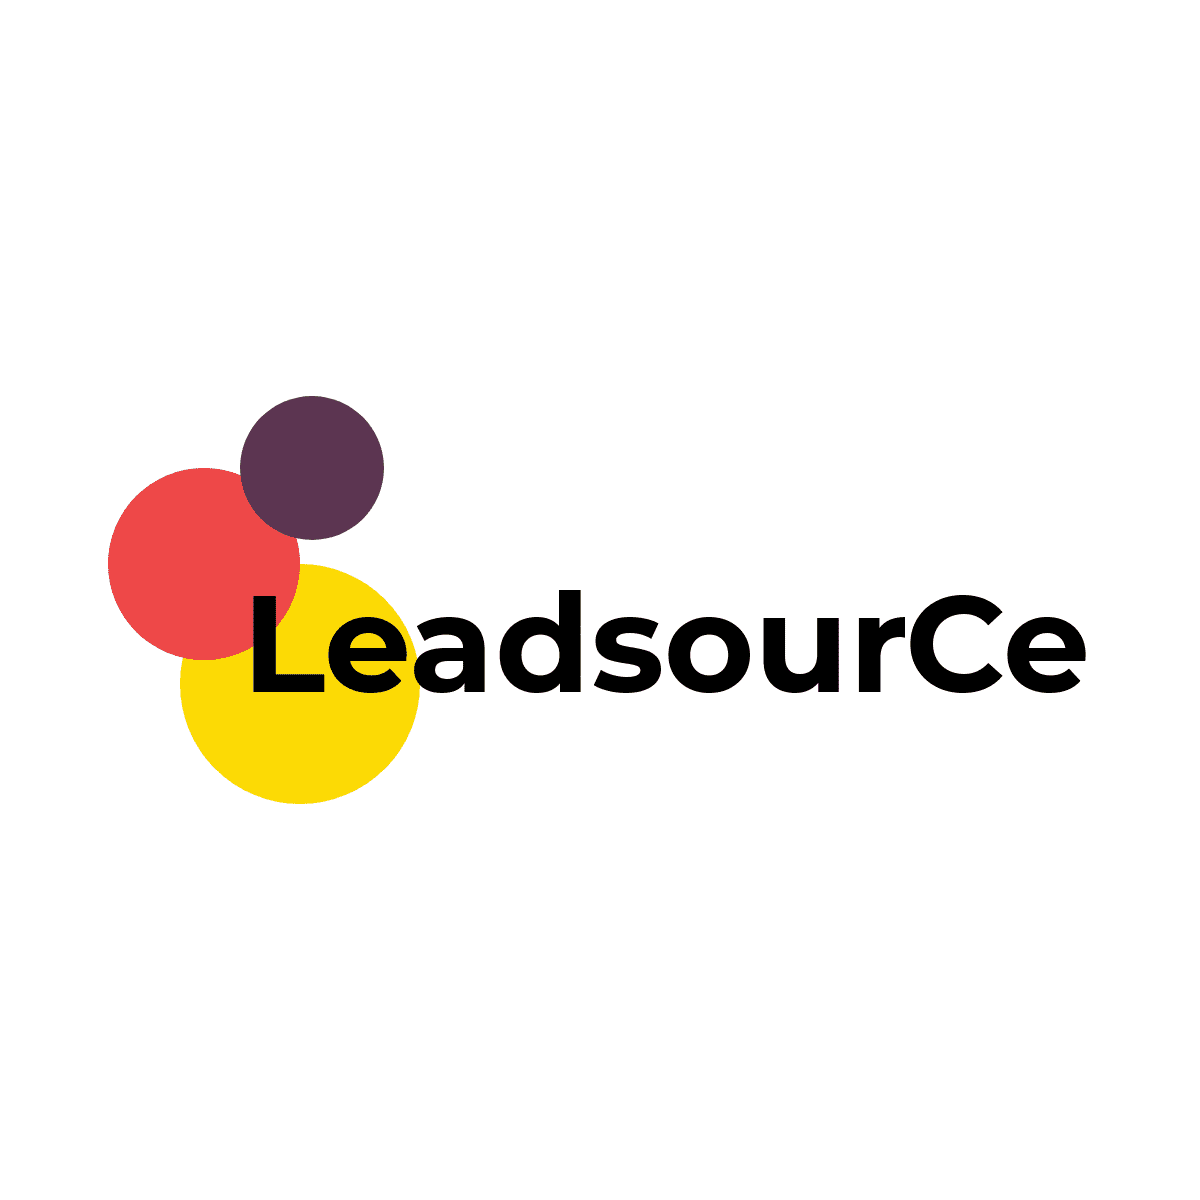 LeadsourCe Online profile on Qualified.One